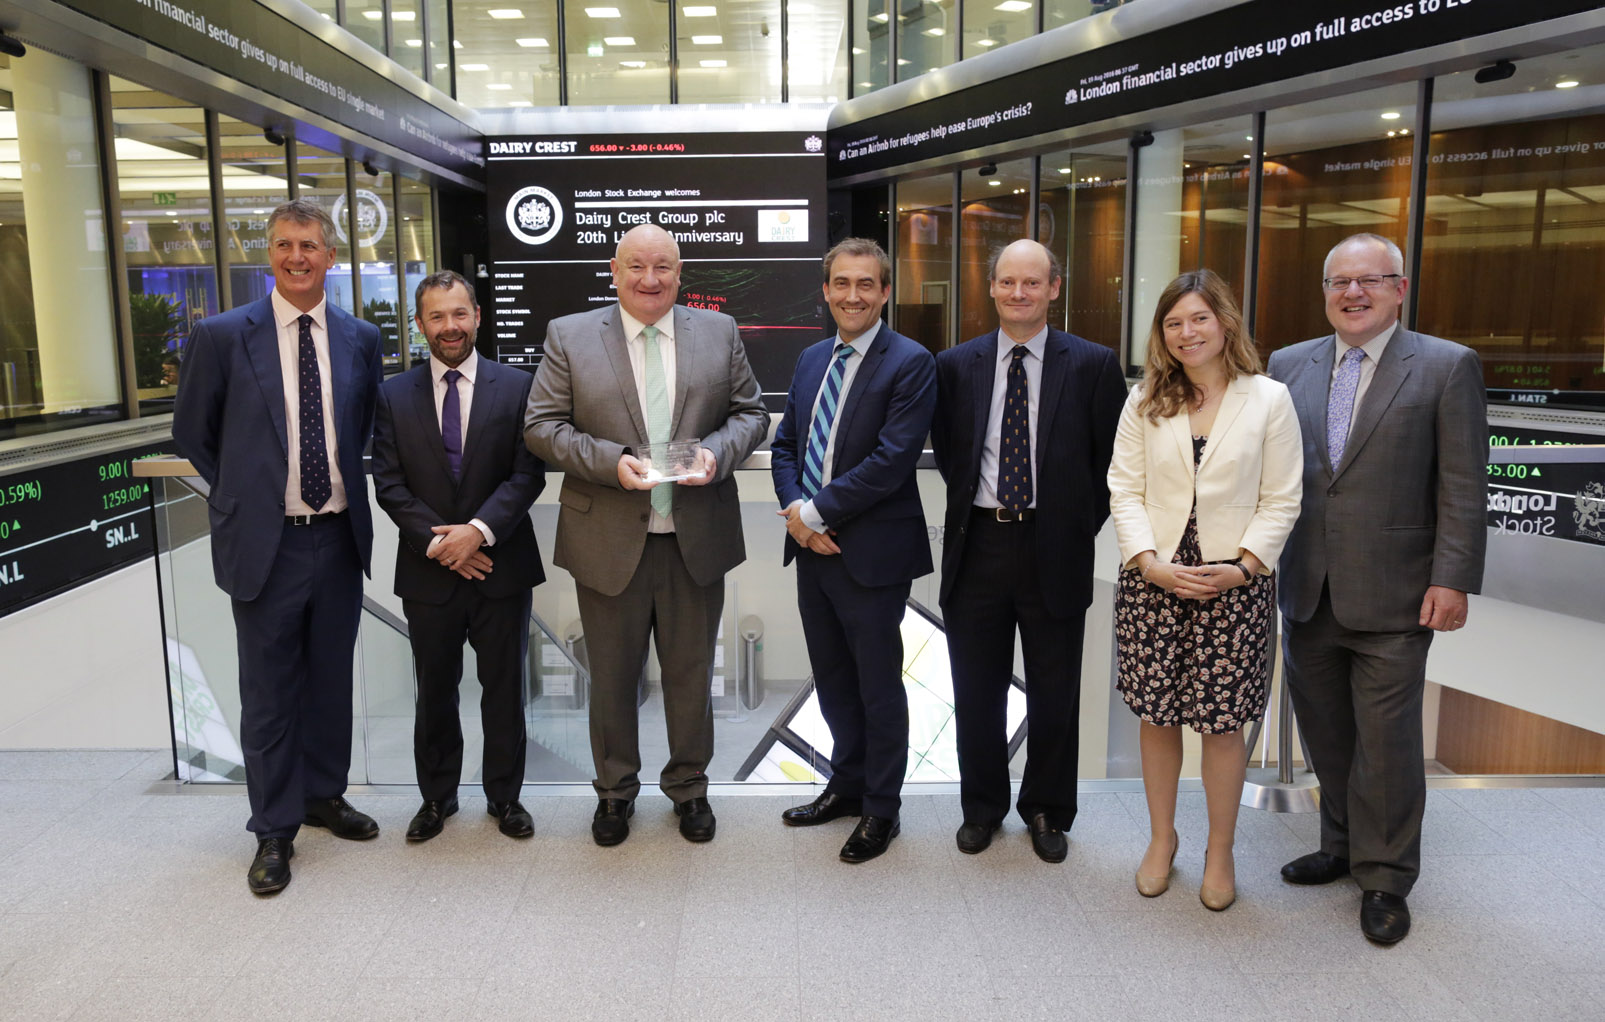 Dairy Crest opening the Stock Exchange